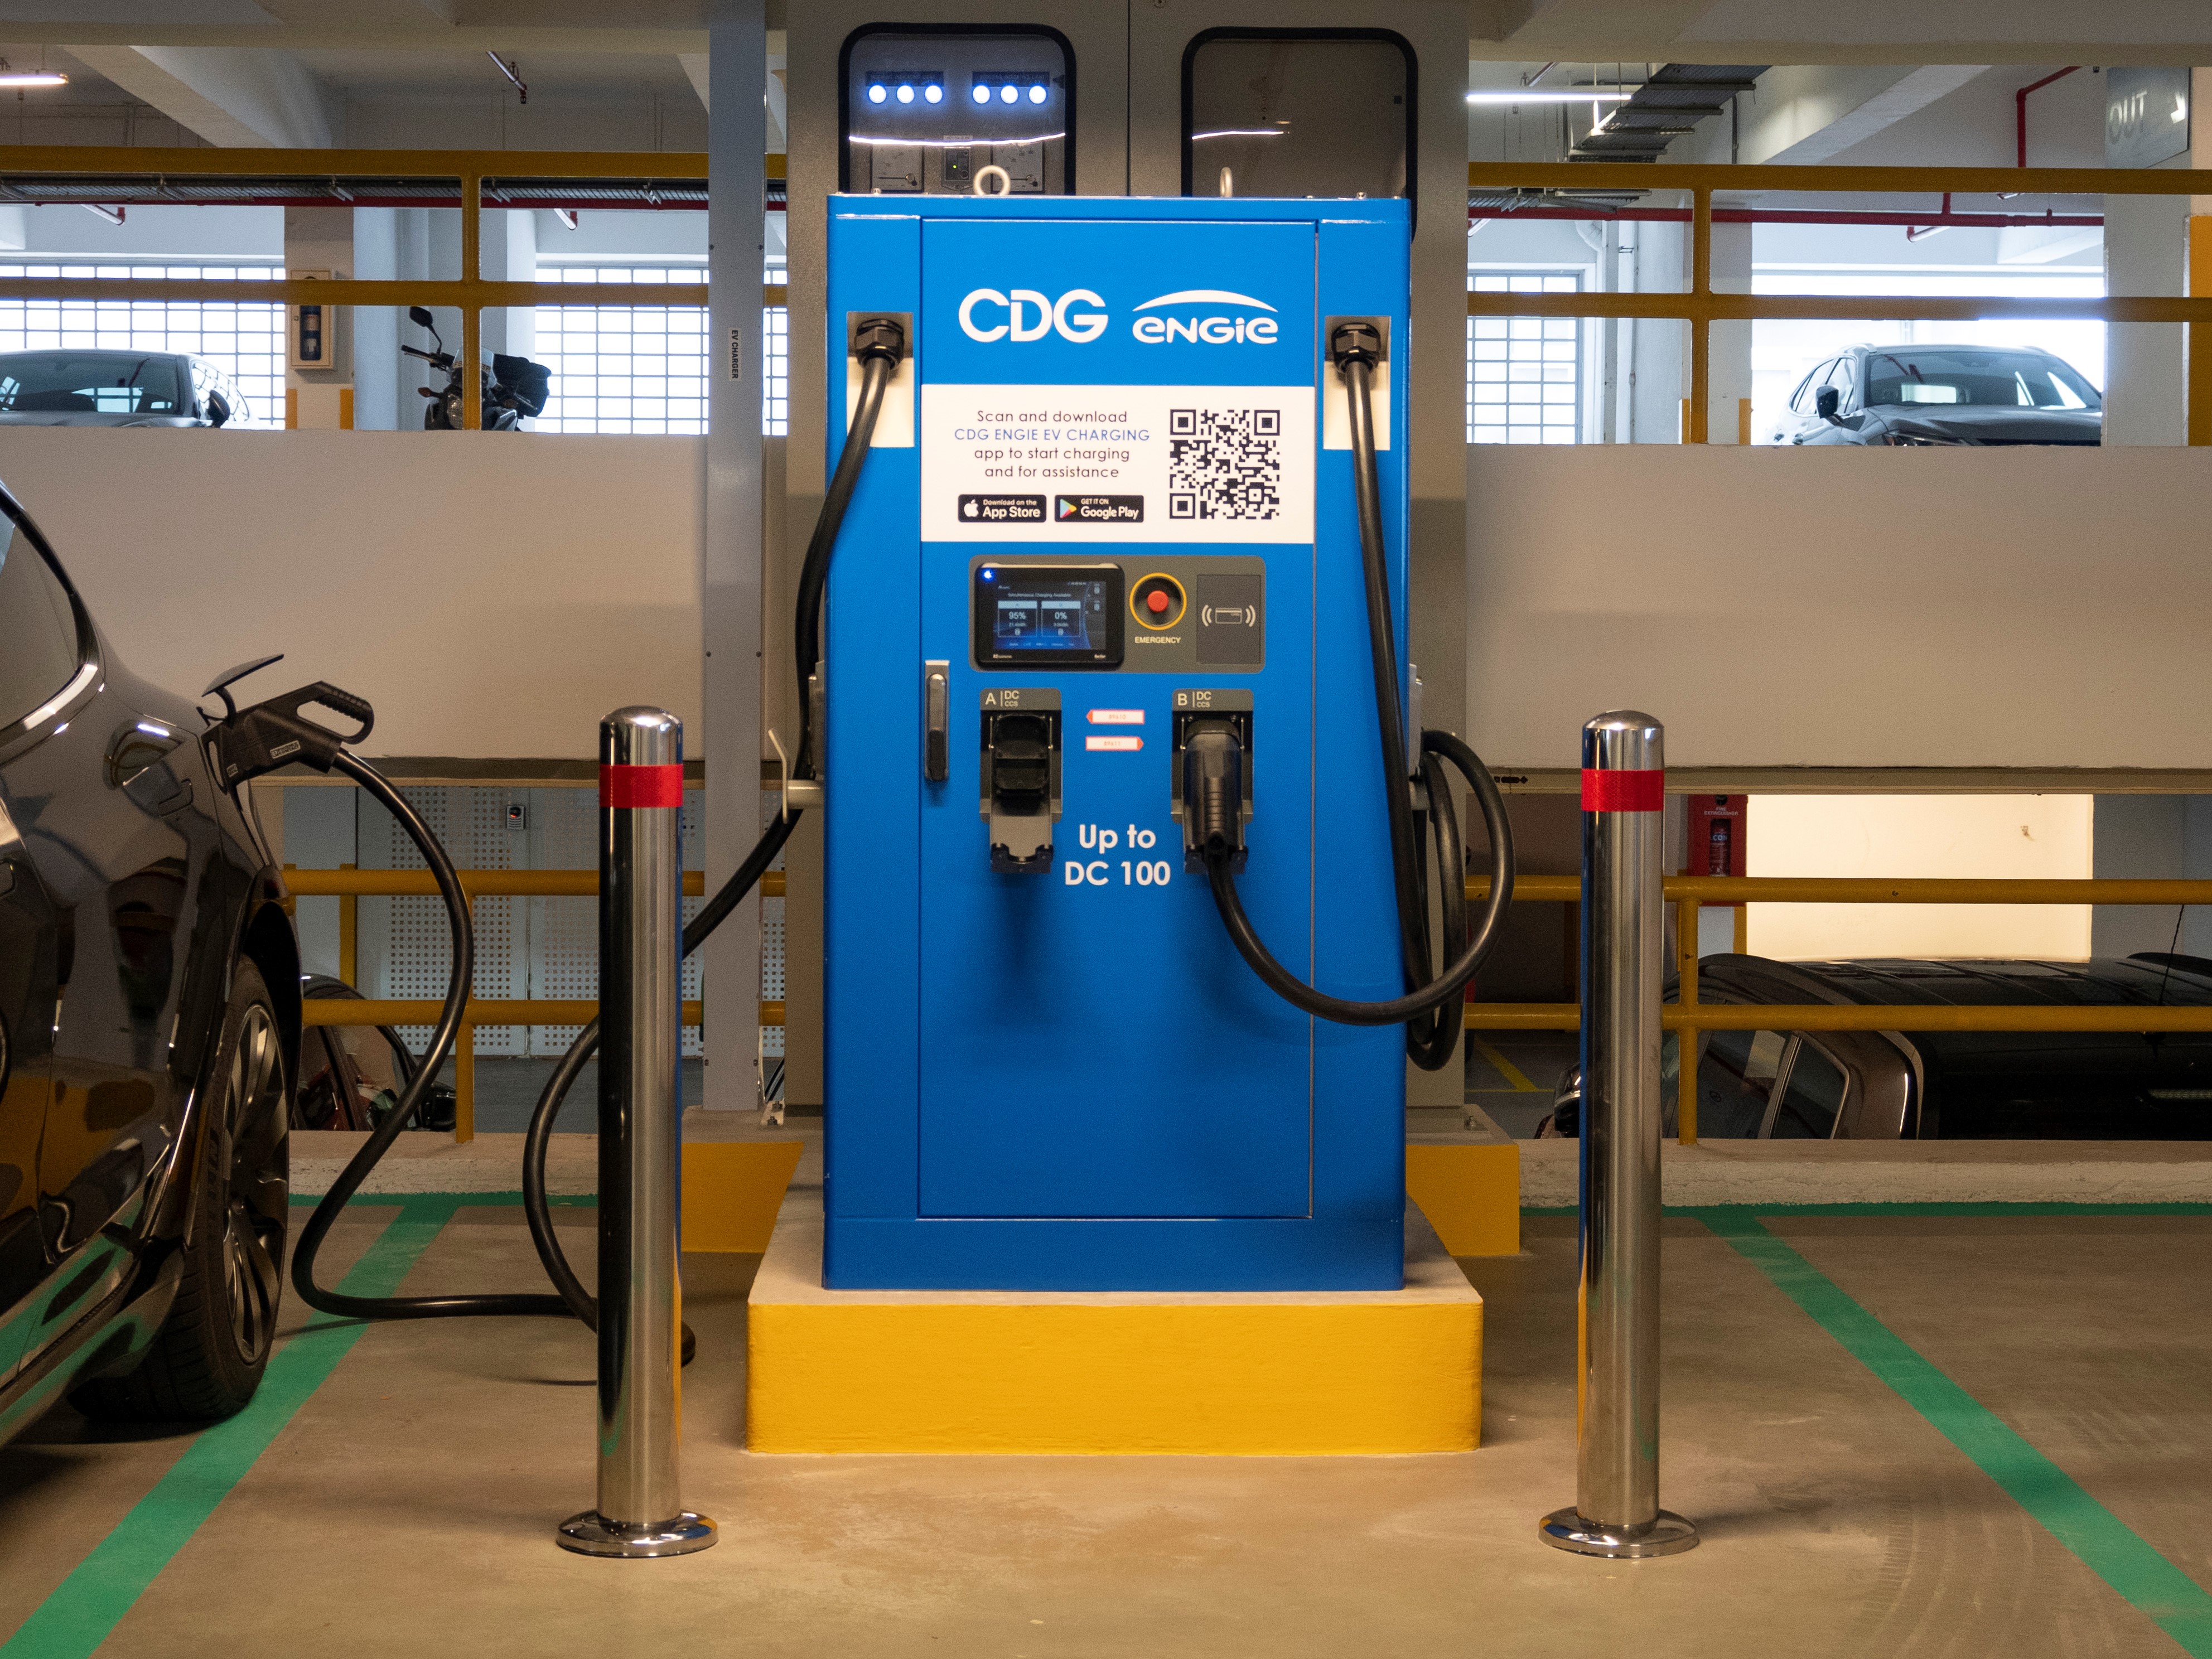 CDG ENGIE wins tender to install EV Charger